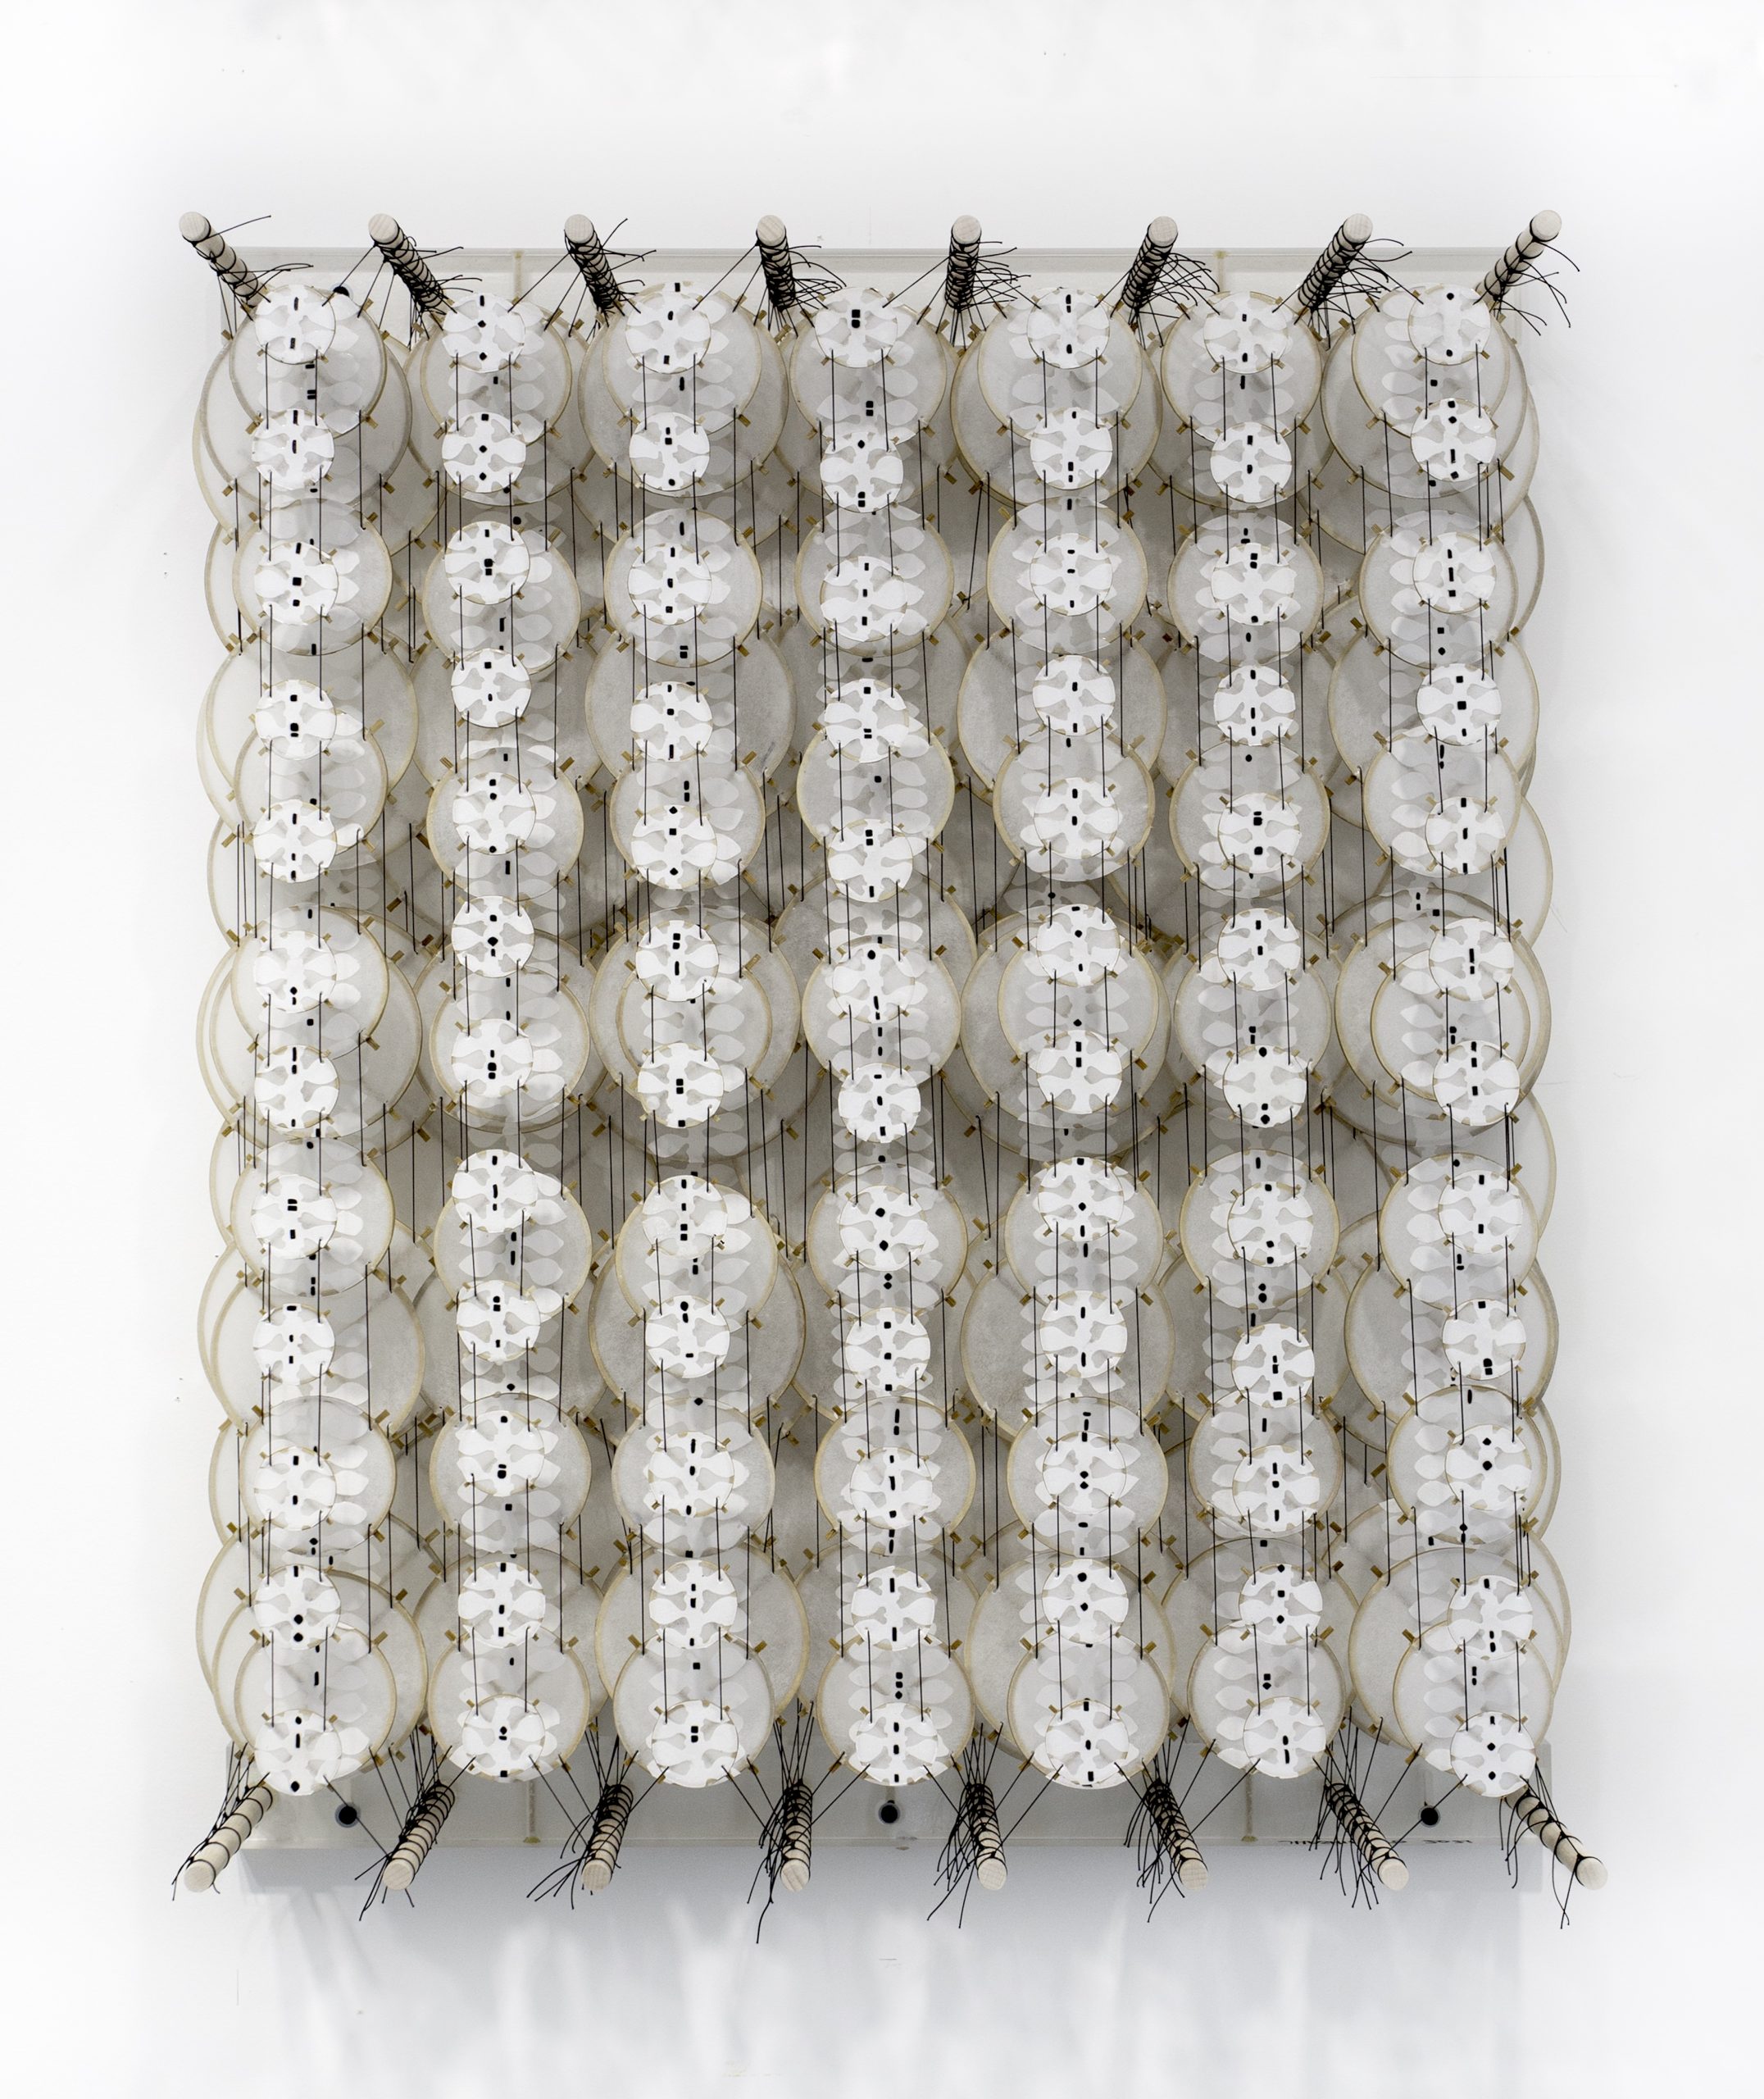 Jacob Hashimoto, The impossible goal of endurance, 2021, bamboo, acrylic, paper, wood, and Dacron, 32 x 25 7:8 x 8 1:4 in (JHa302268)_A